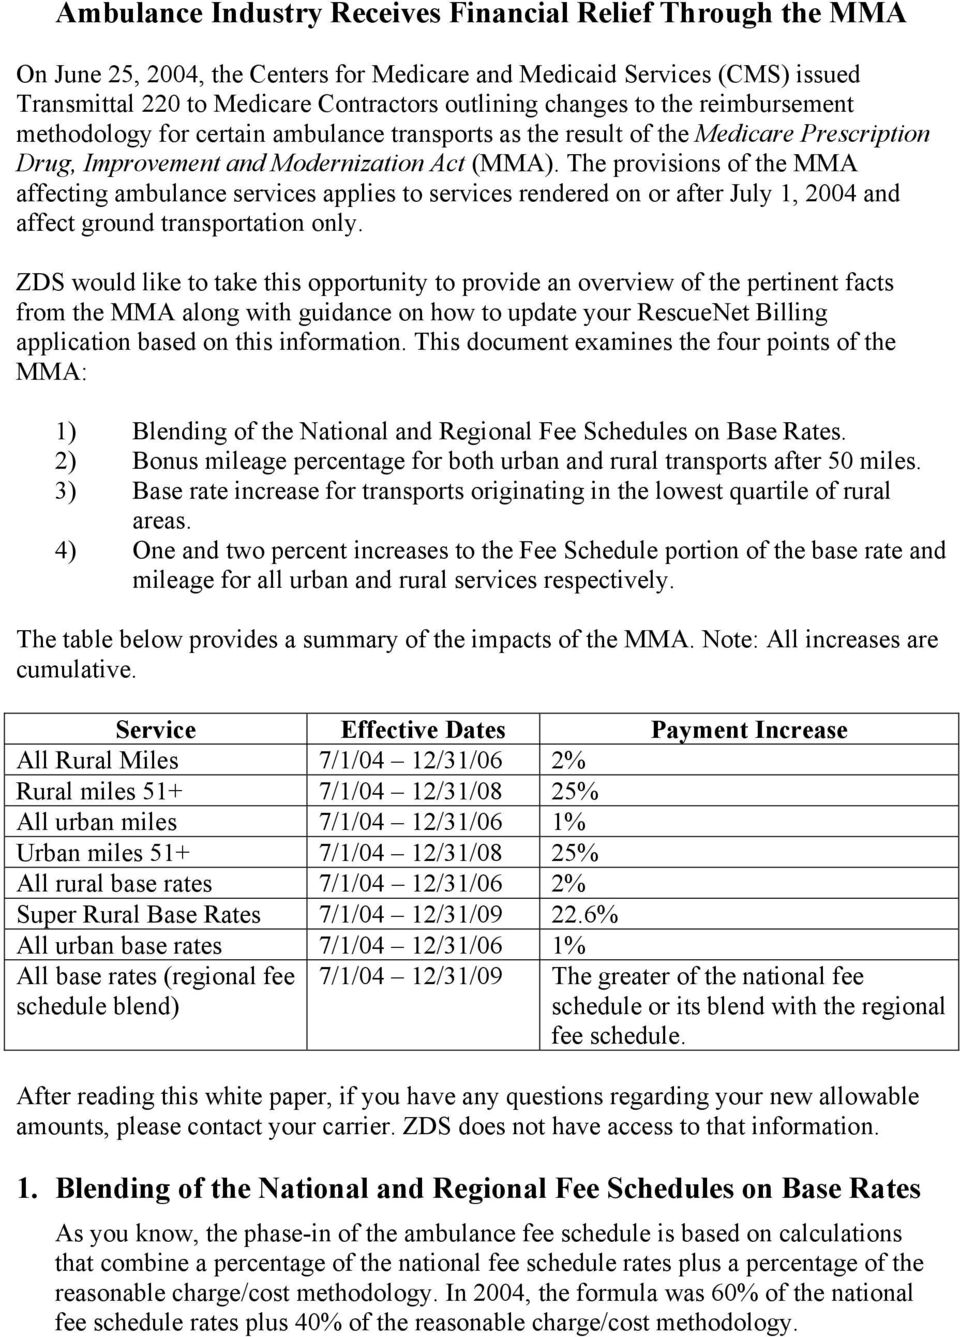 The provisions of the MMA affecting ambulance services applies to services rendered on or after July 1, 2004 and affect ground transportation only.